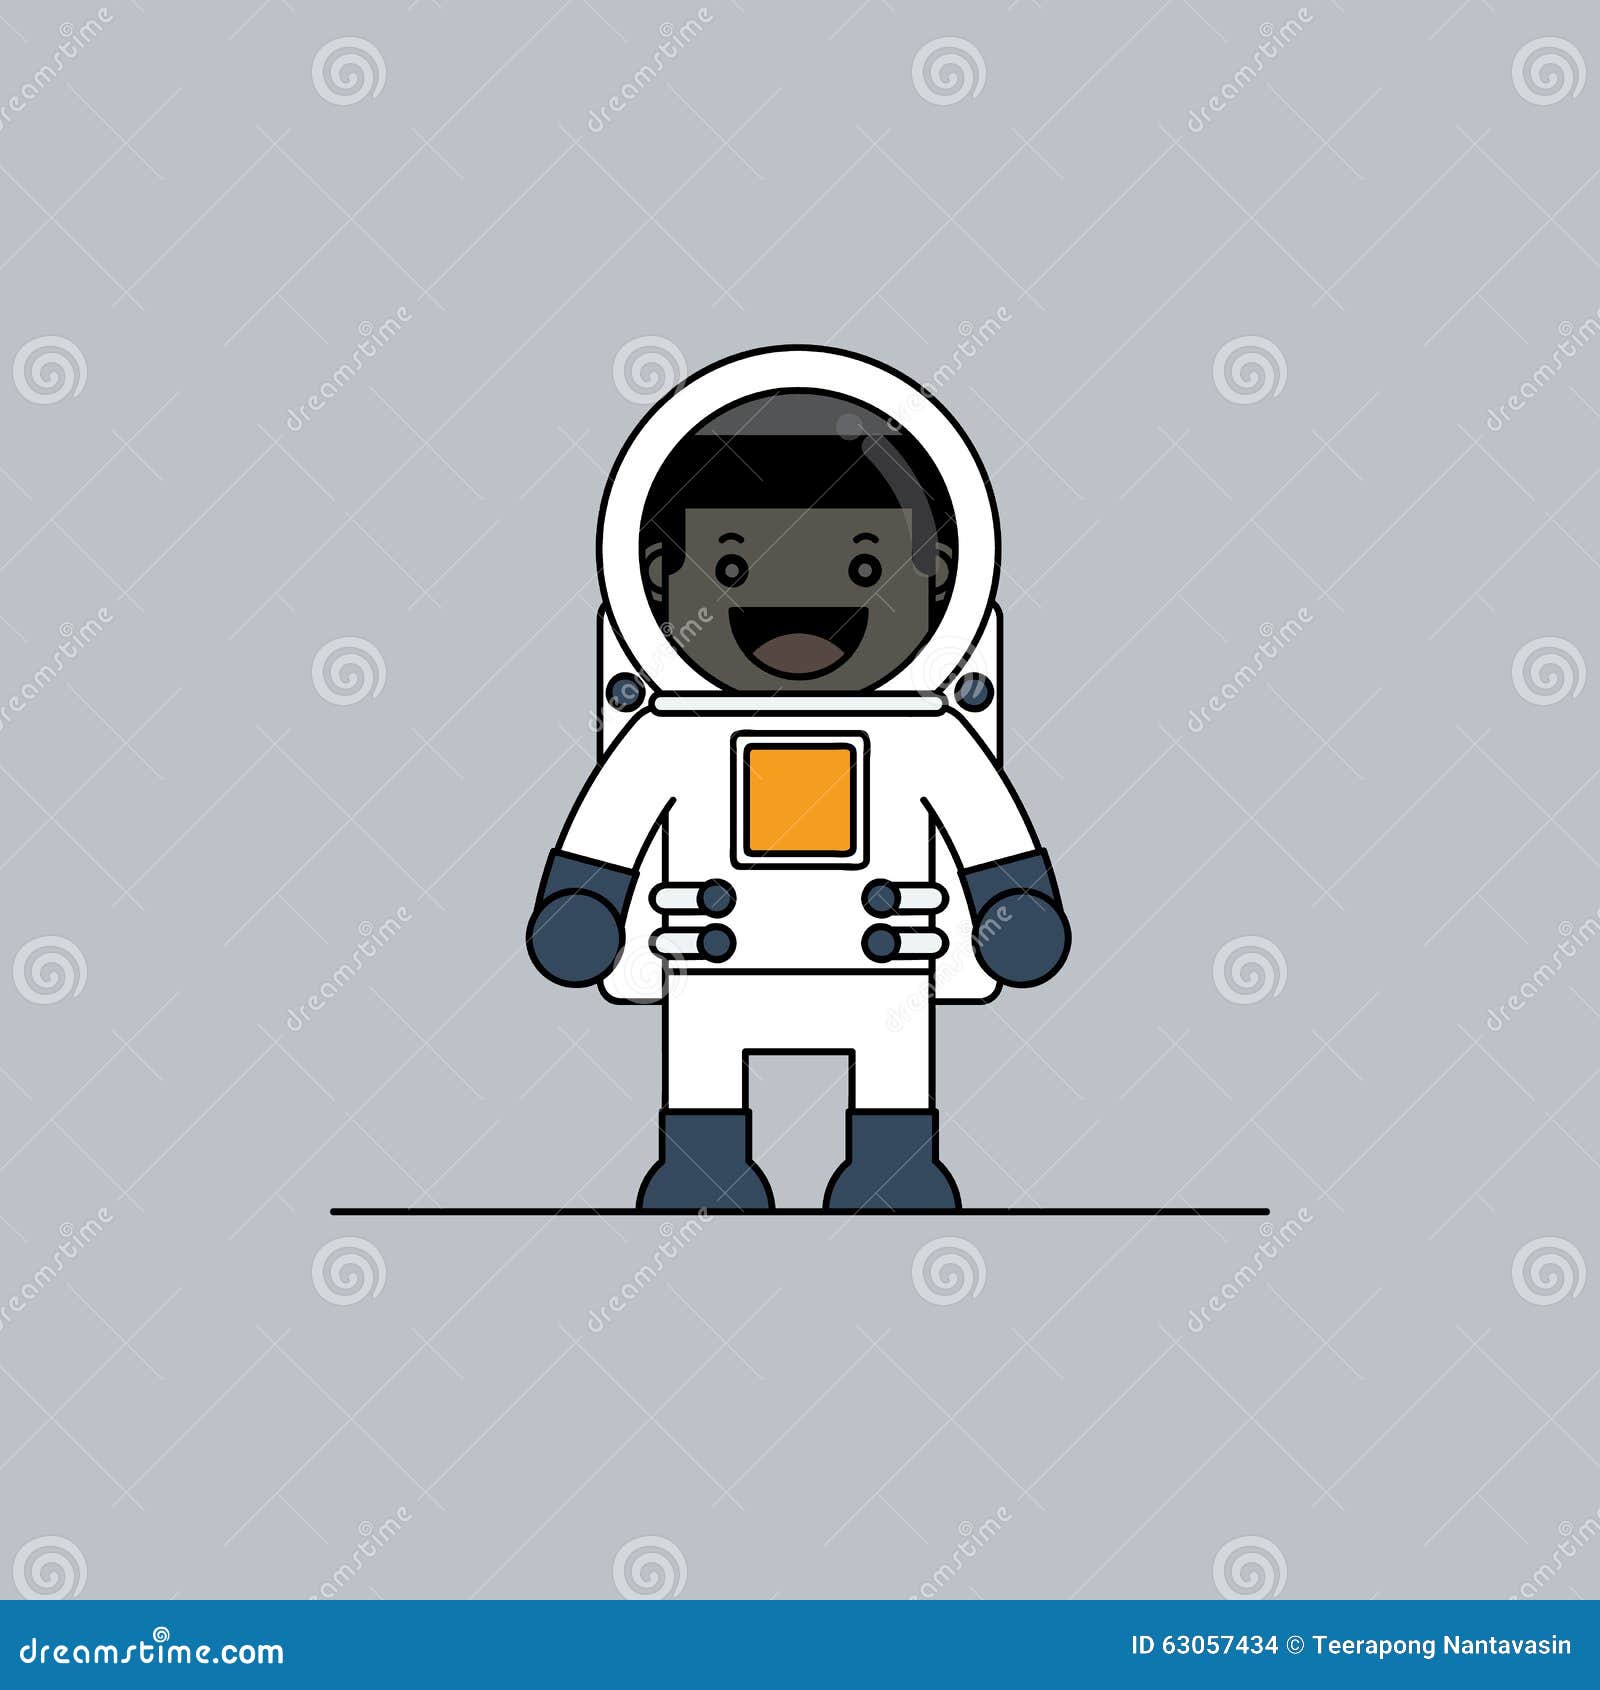 Cute Man in the Astronaut Suit. Stock Vector - Illustration of funny